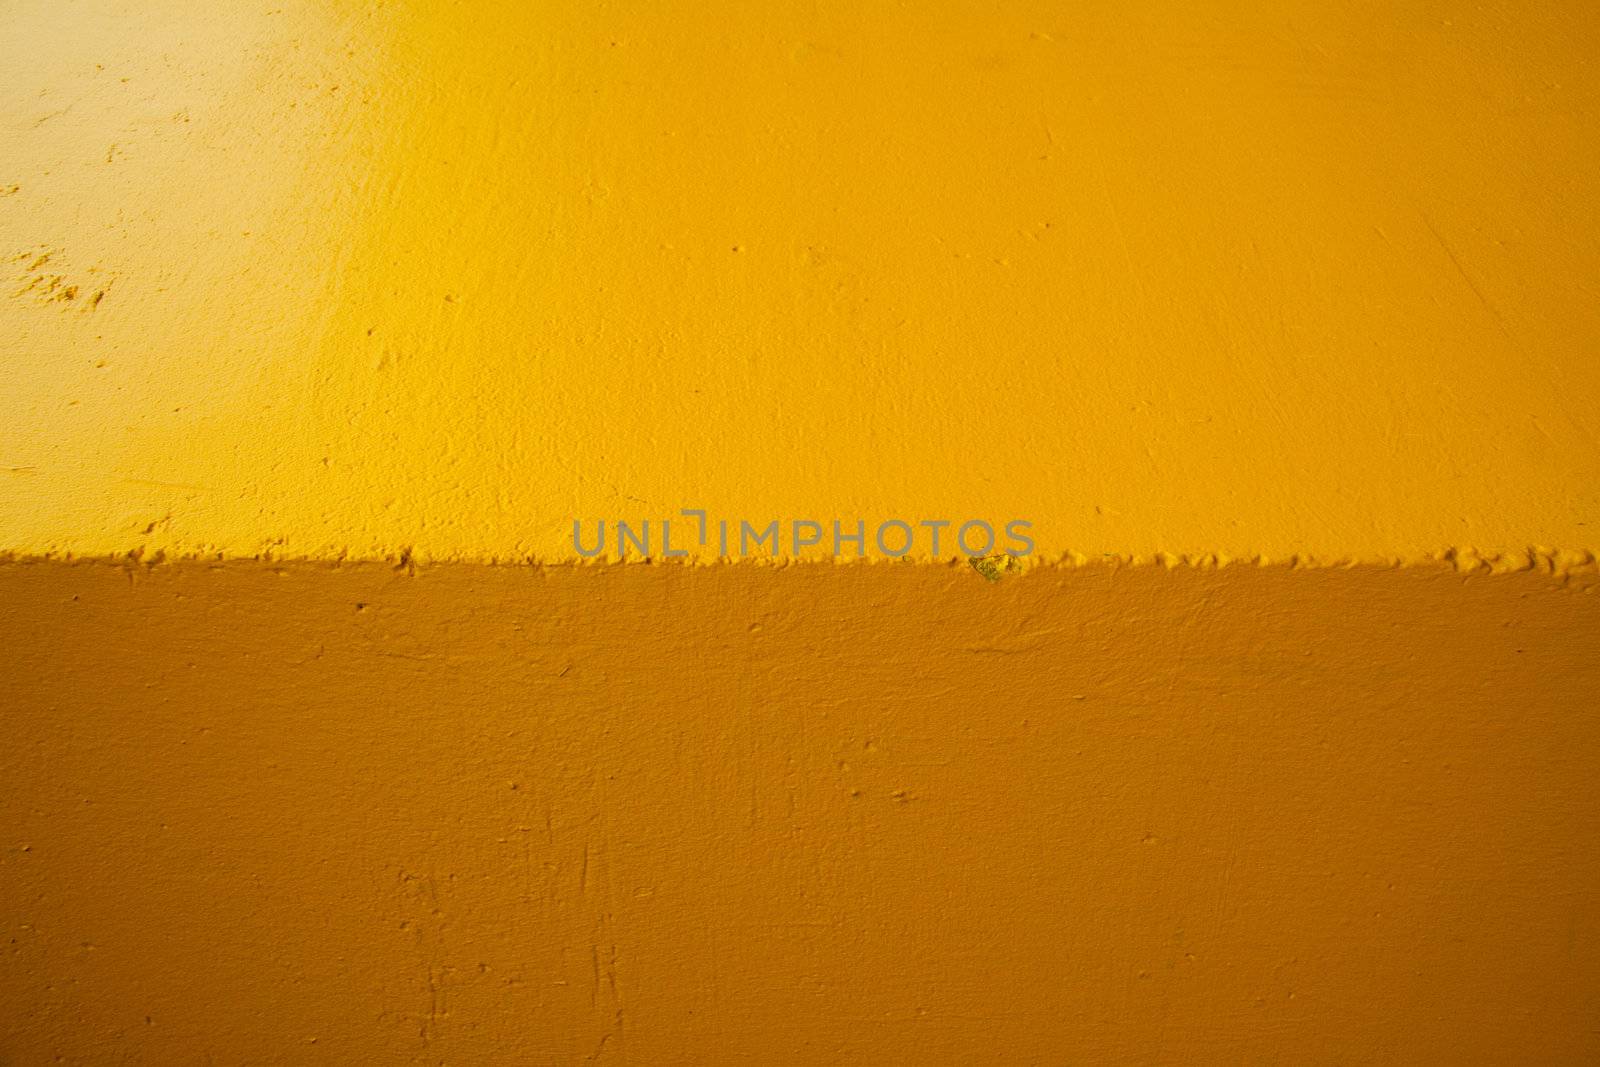 Abstract shot of the edge of a building turned horizontally to create a background image of two shades of color.